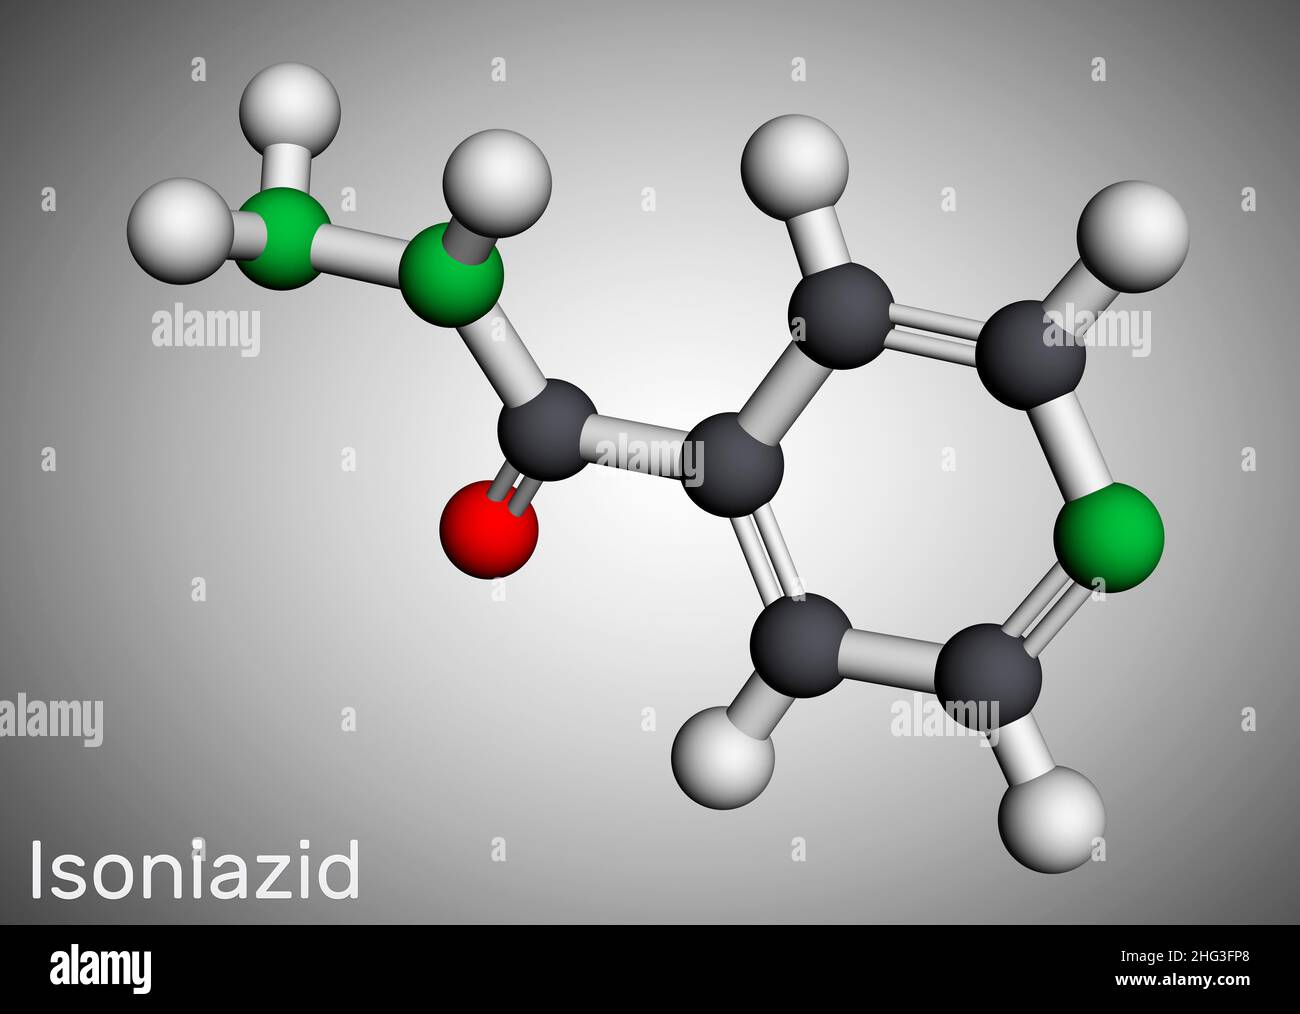 Isoniazid, isonicotinic acid hydrazide, INH molecule. It is antibiotic, used to treat mycobacterial infections, primarily tuberculosis. Molecular mode Stock Photo